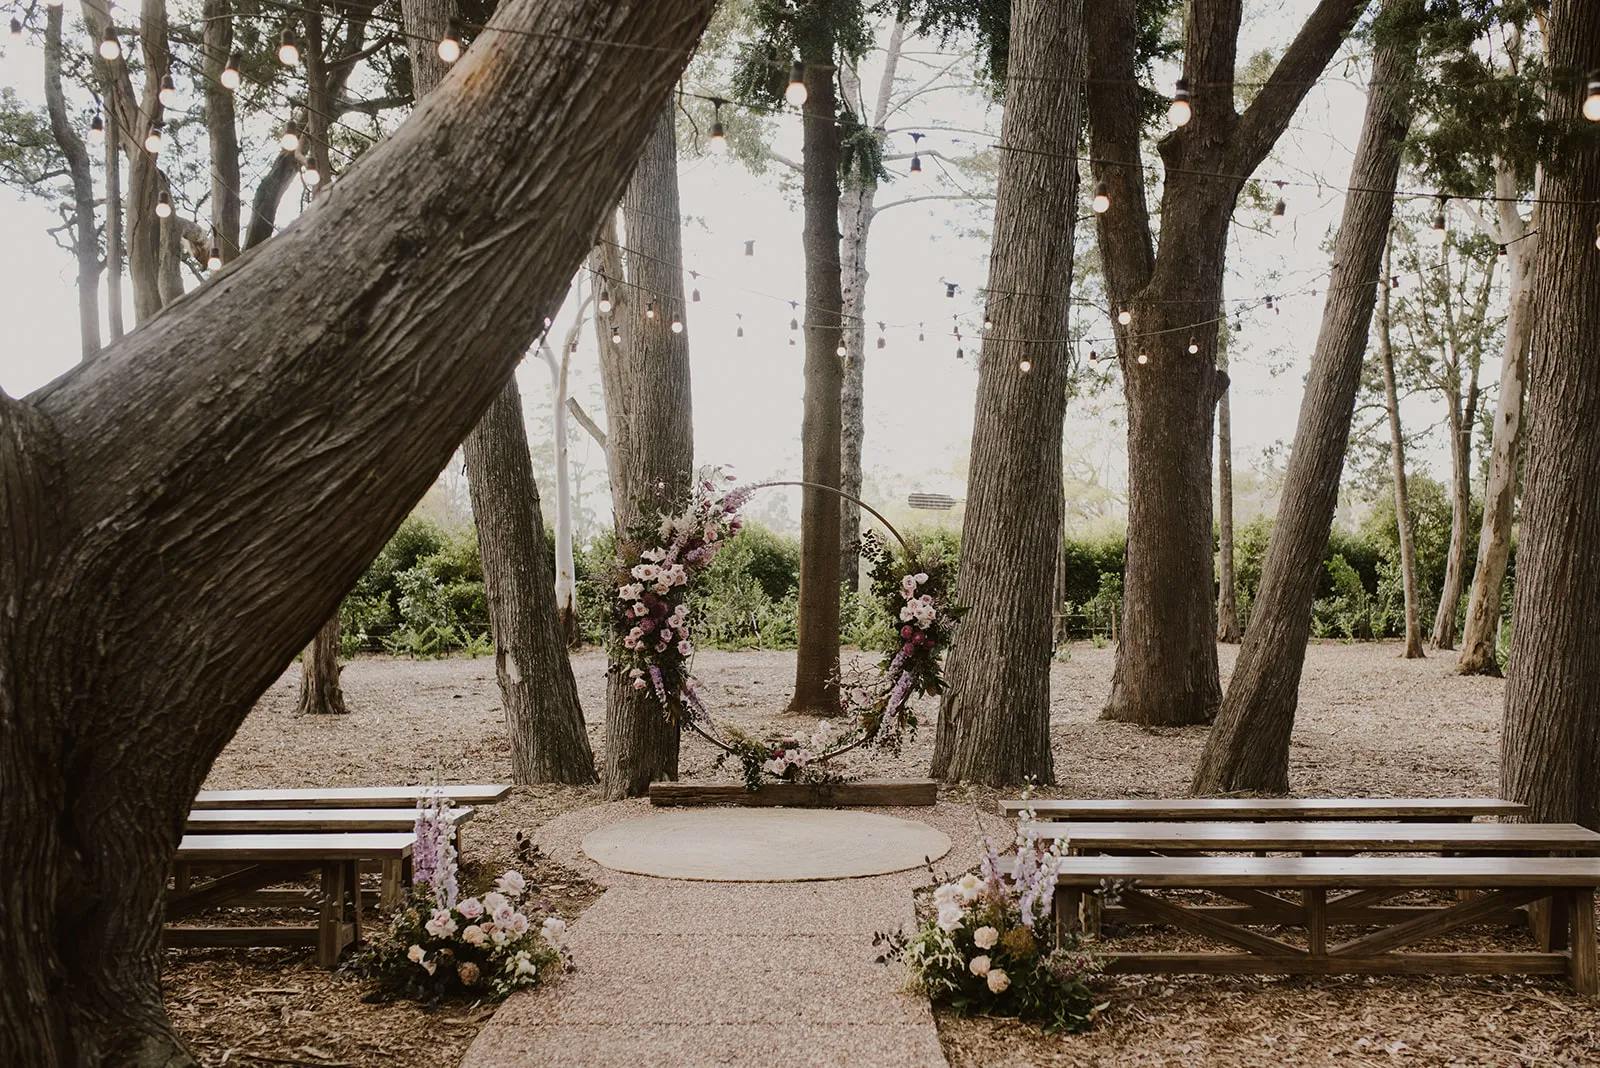 A rustic outdoor wedding ceremony setting among tall trees, featuring a circular floral arch adorned with pink and purple flowers. Wooden benches line both sides of the aisle, which is decorated with additional floral arrangements. String lights hang above.